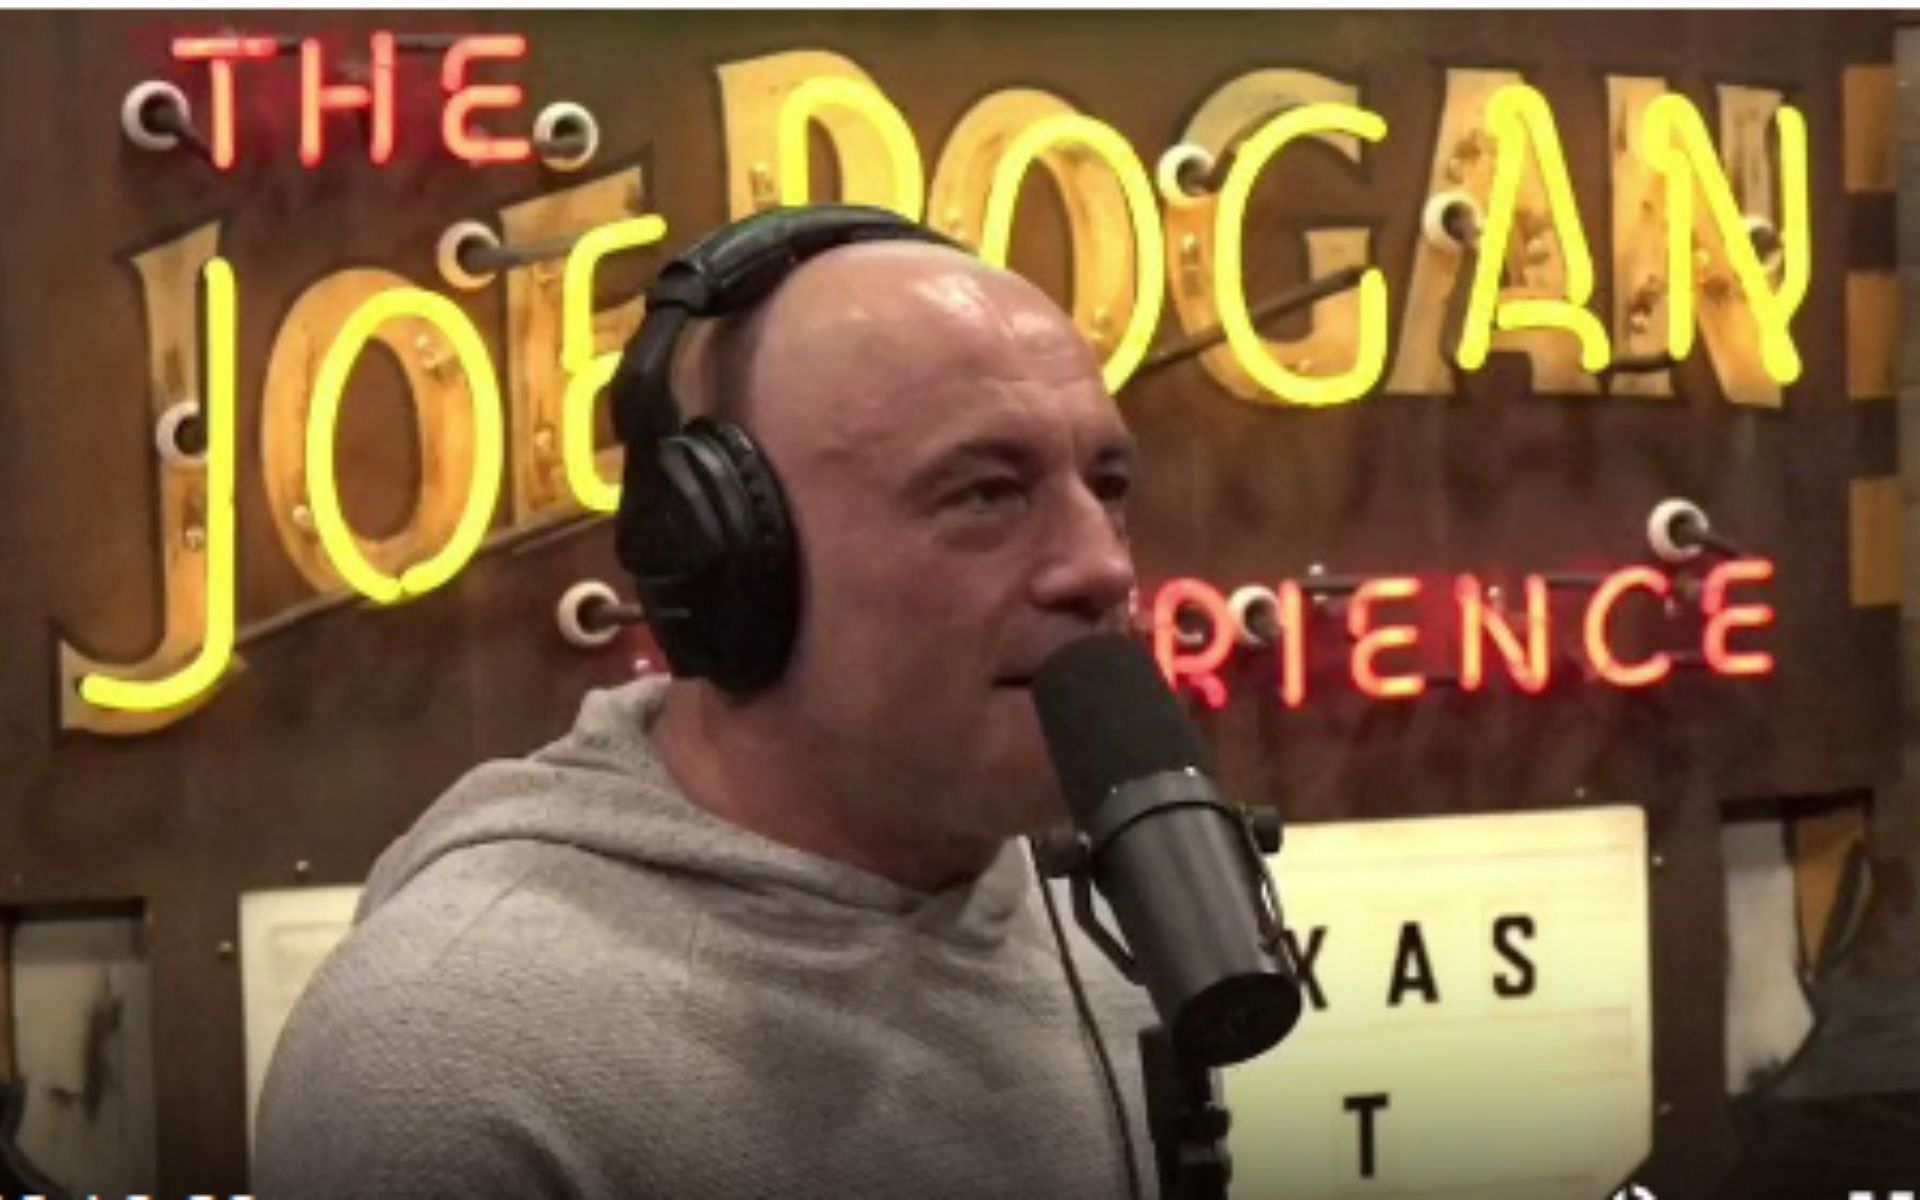 UFC fighters joke about paying Joe Rogan for JRE podcast appearance [Image courtesy: @PowerfulJRE on YouTube]